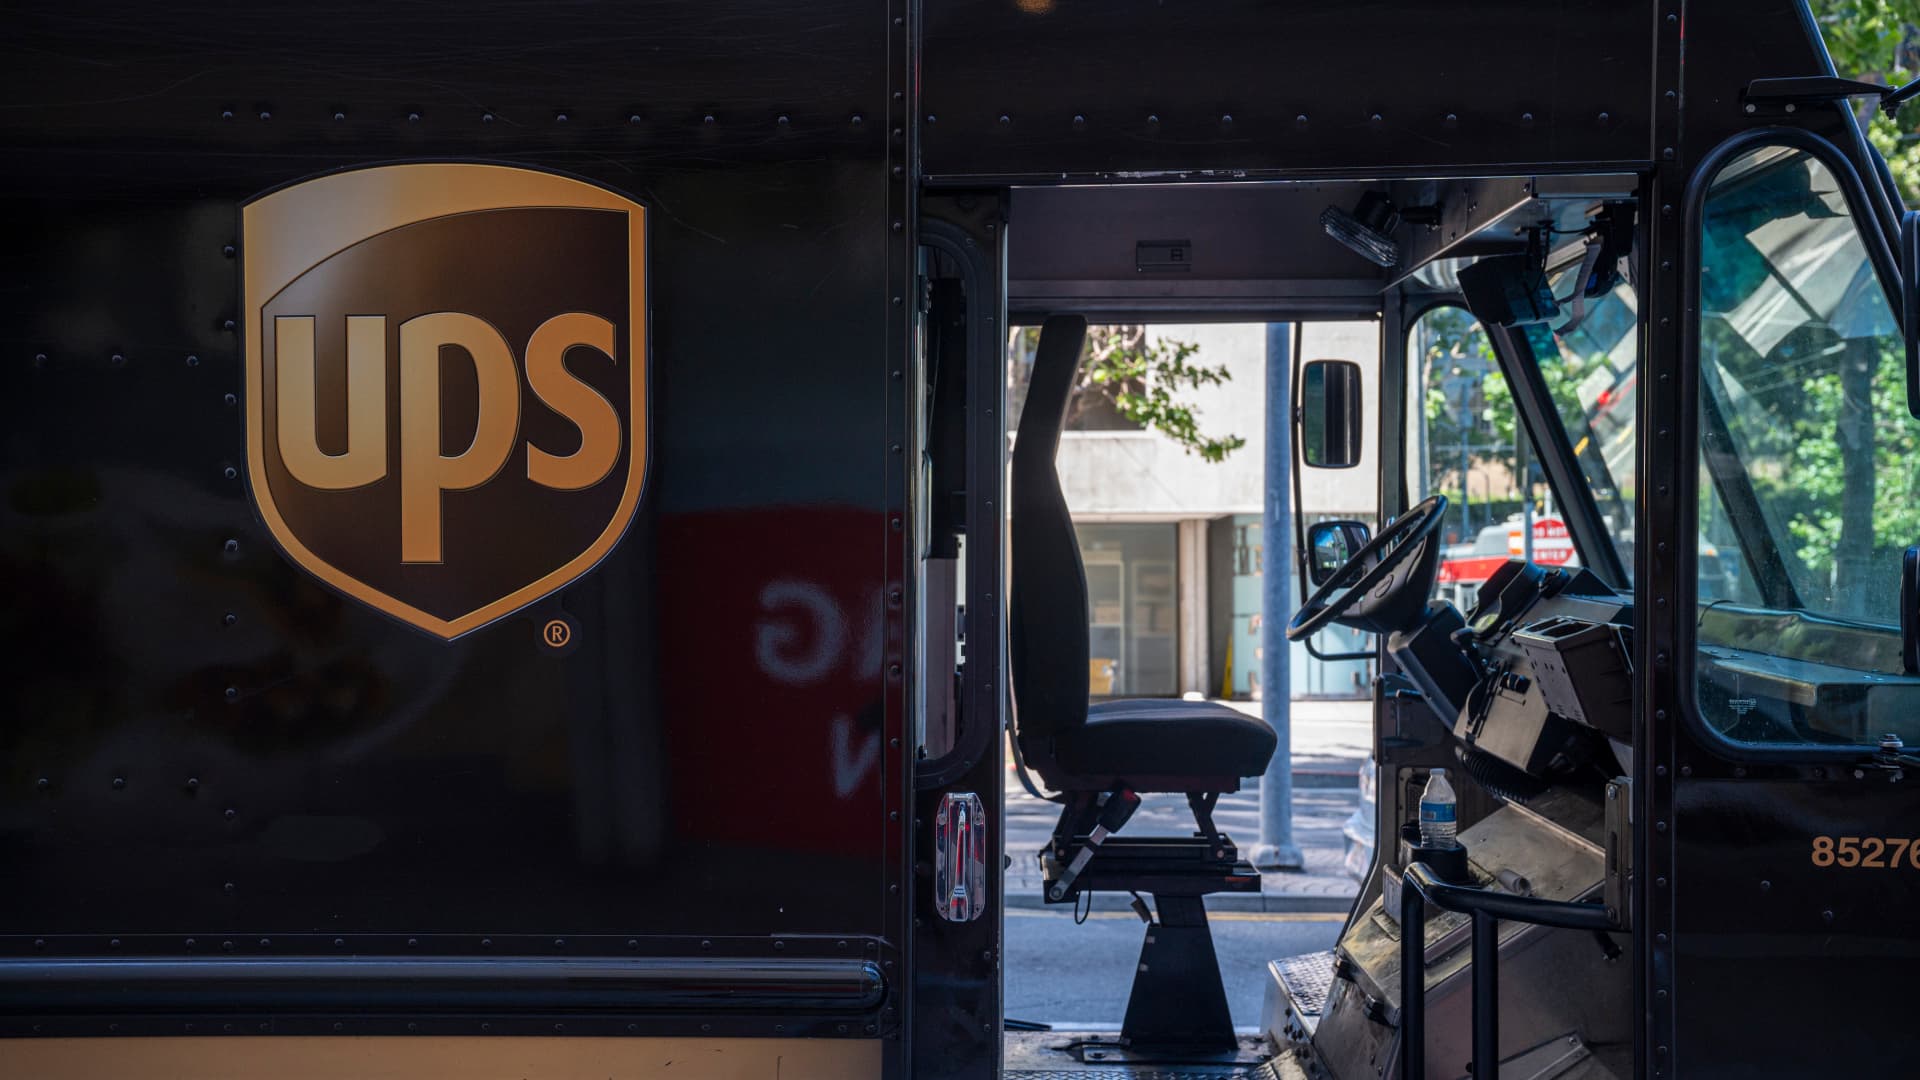 UPS reached a tentative agreement to renew a five-year labor contract with the Teamsters ahead of a July 31, 2023 deadline, averting a costly strike.